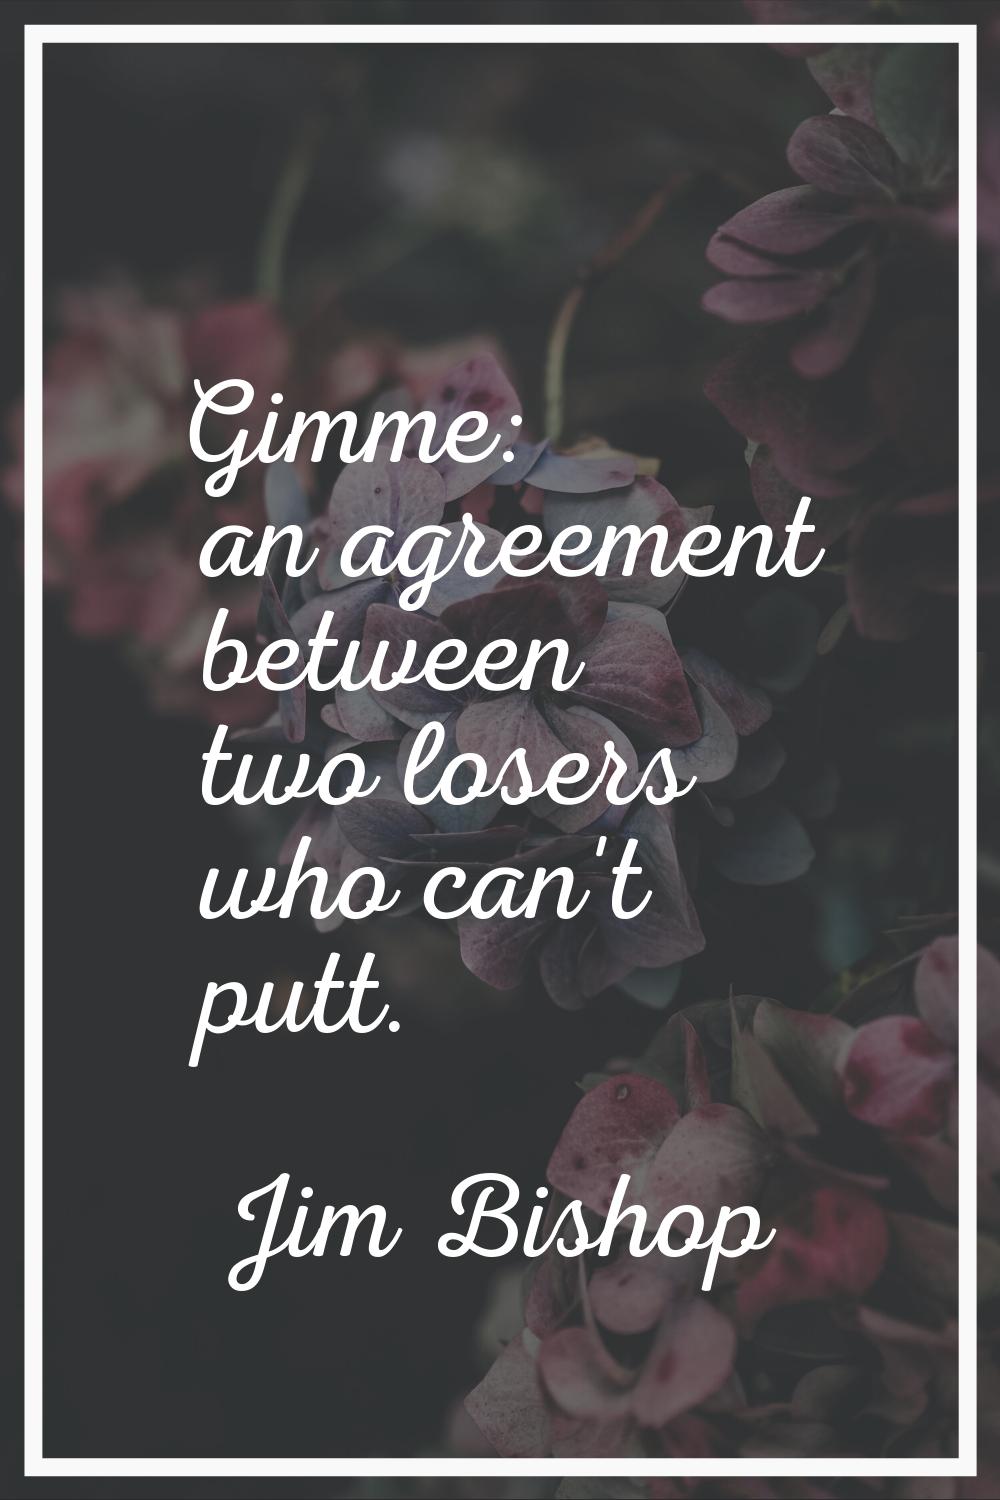 Gimme: an agreement between two losers who can't putt.